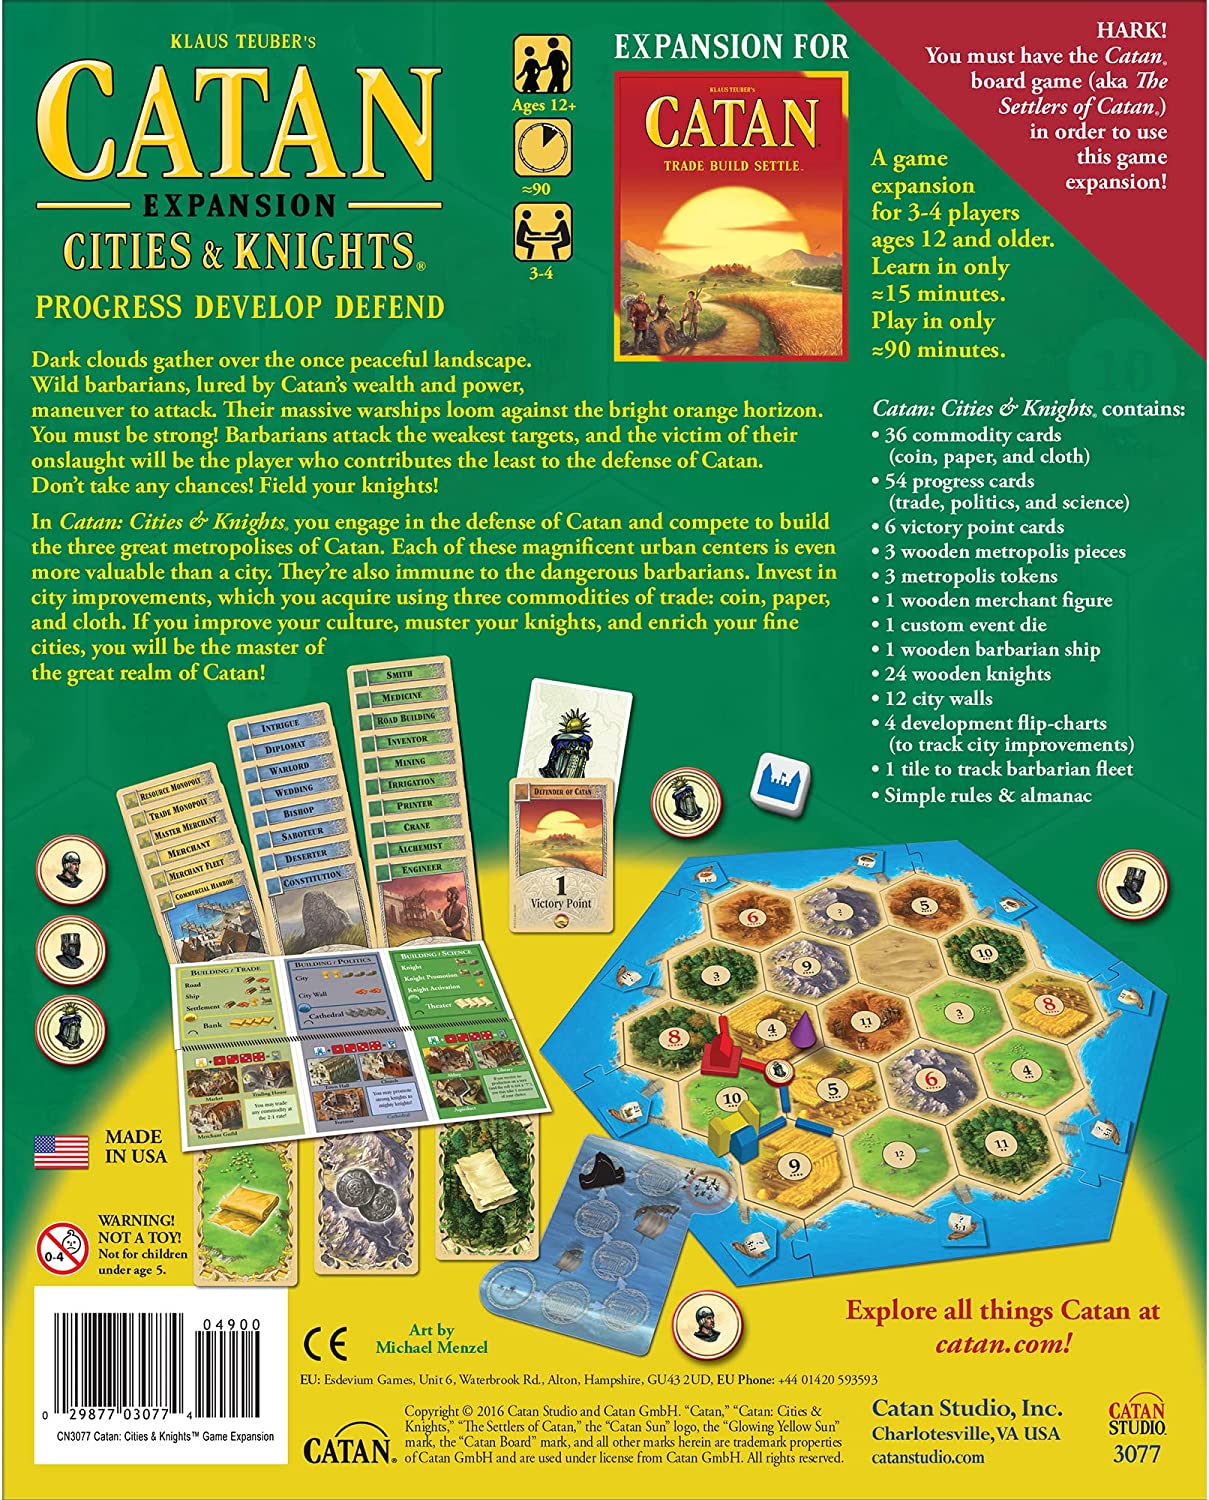 Catan: Cities & Knights (5th Edition Expansion for Catan) back of box